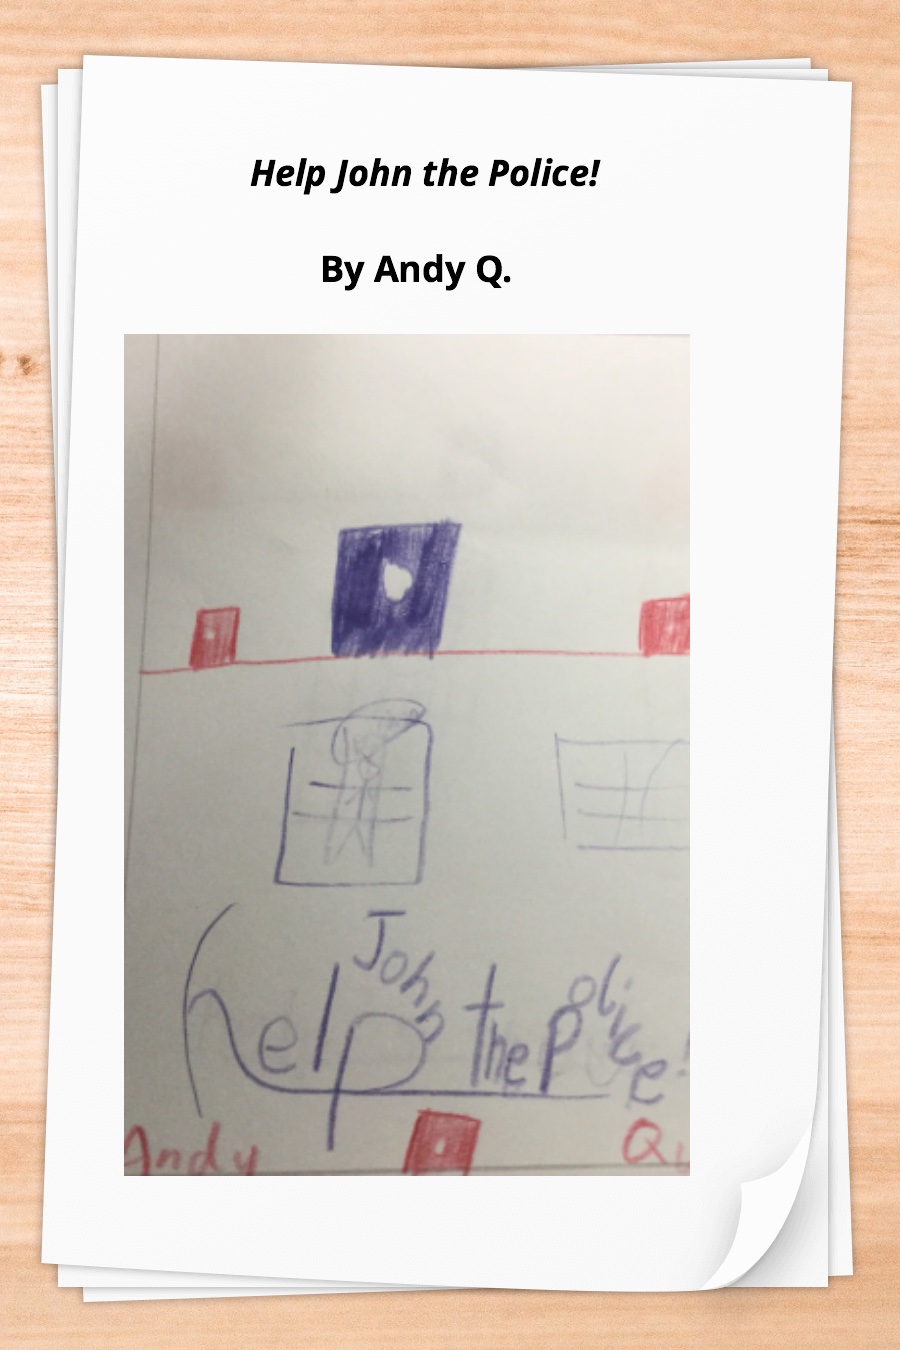 Help John the Police by Andy Q (2)